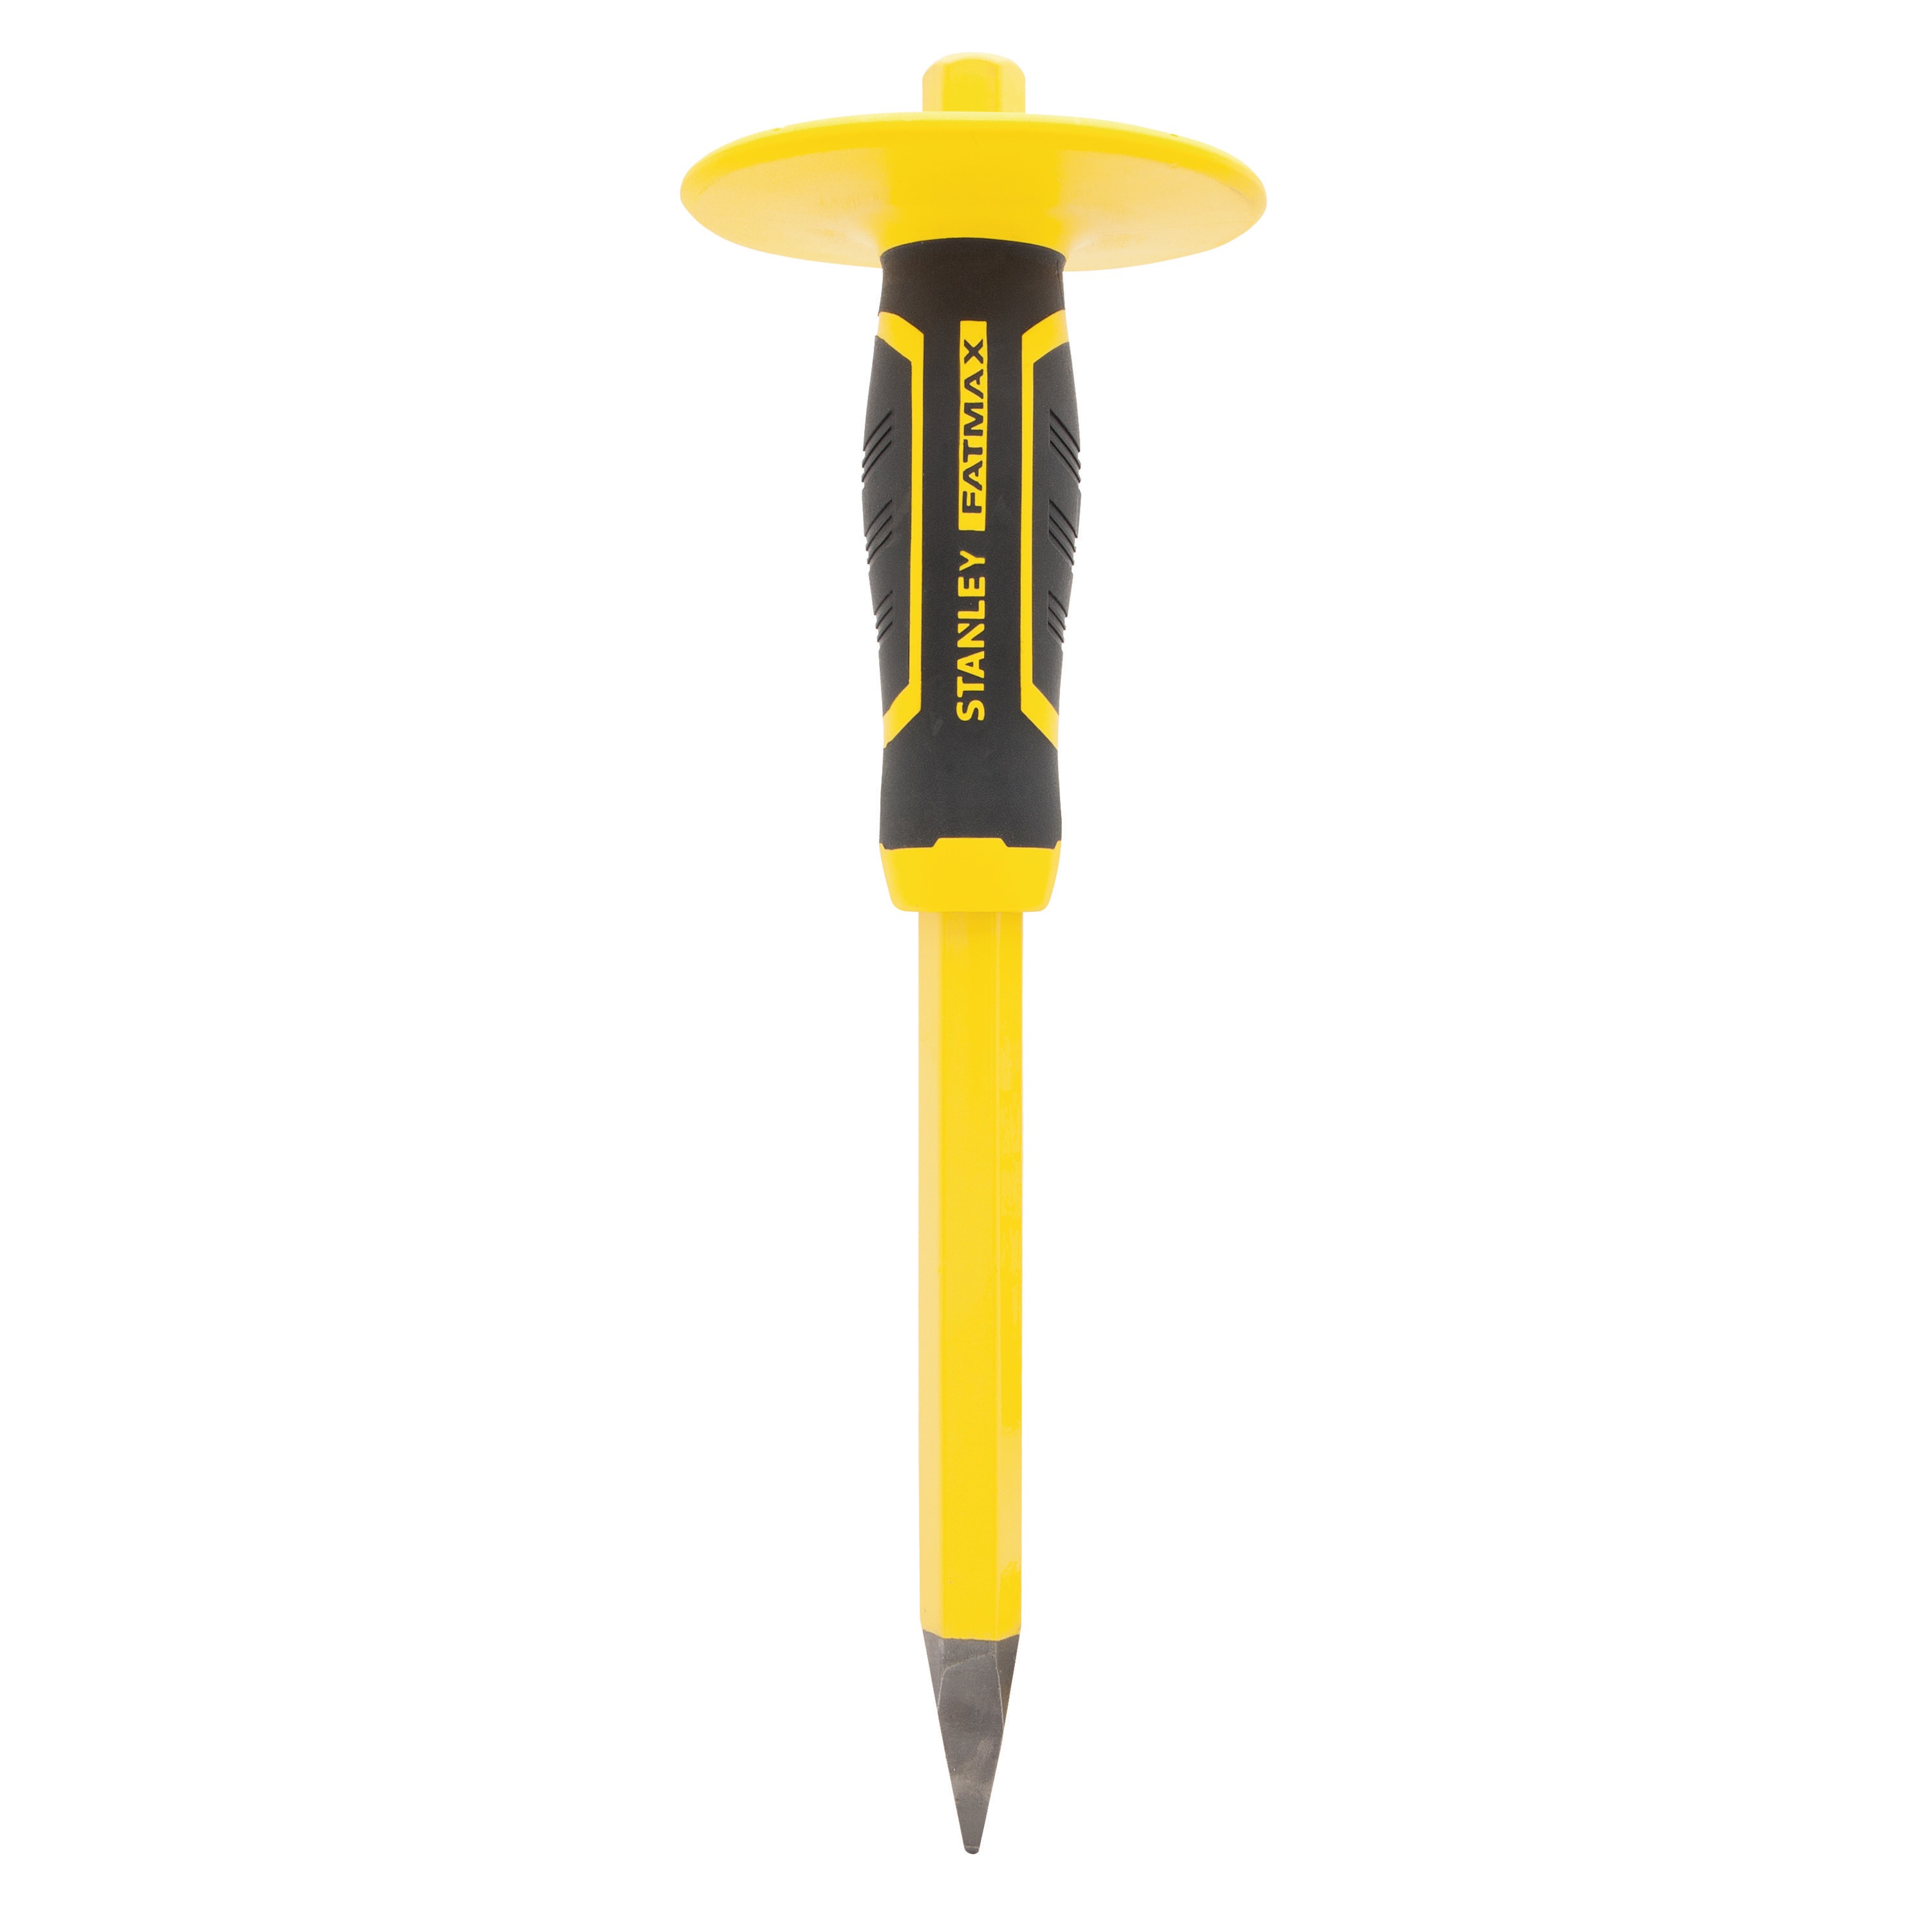 5/8 in FATMAX® Concrete Chisel with Guard - FMHT16578 | STANLEY Tools